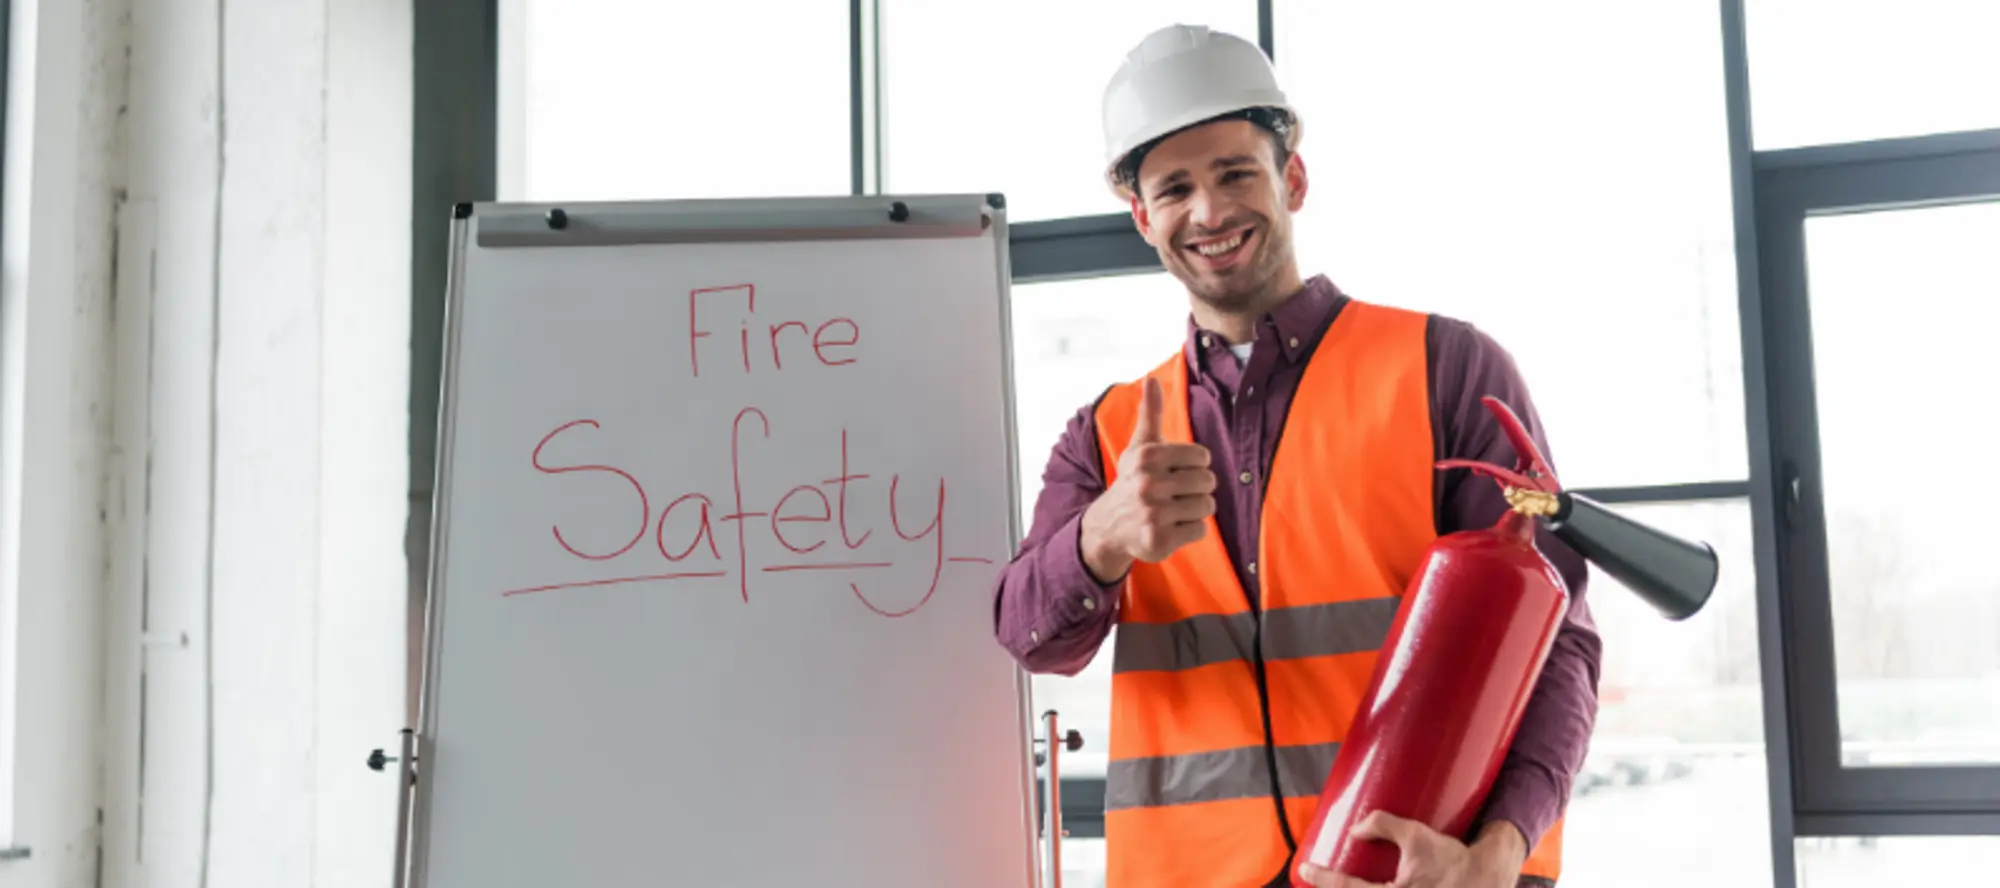 Fire safety training how to use a fire extinguisher